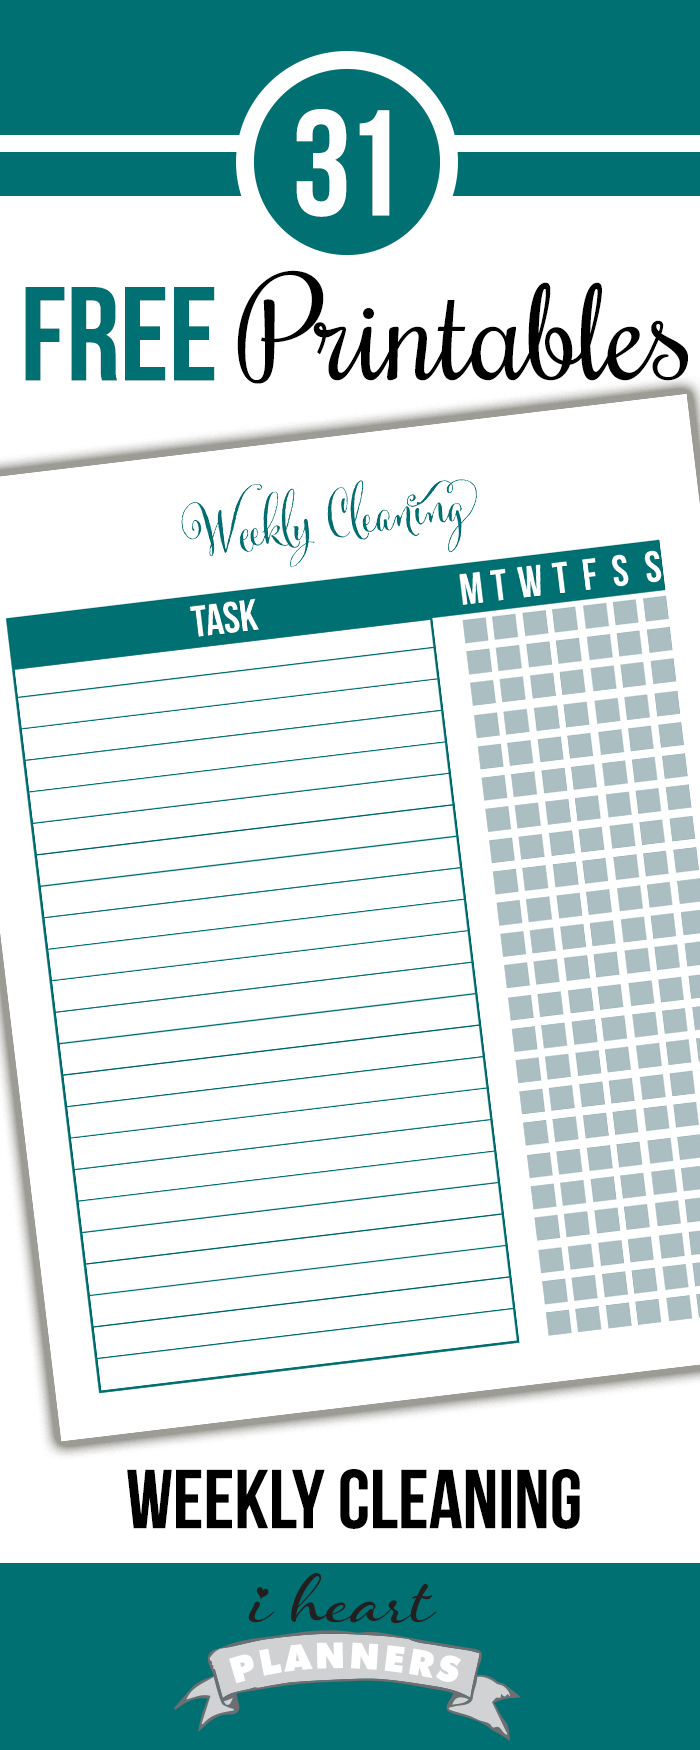 Free printable weekly cleaning checklist